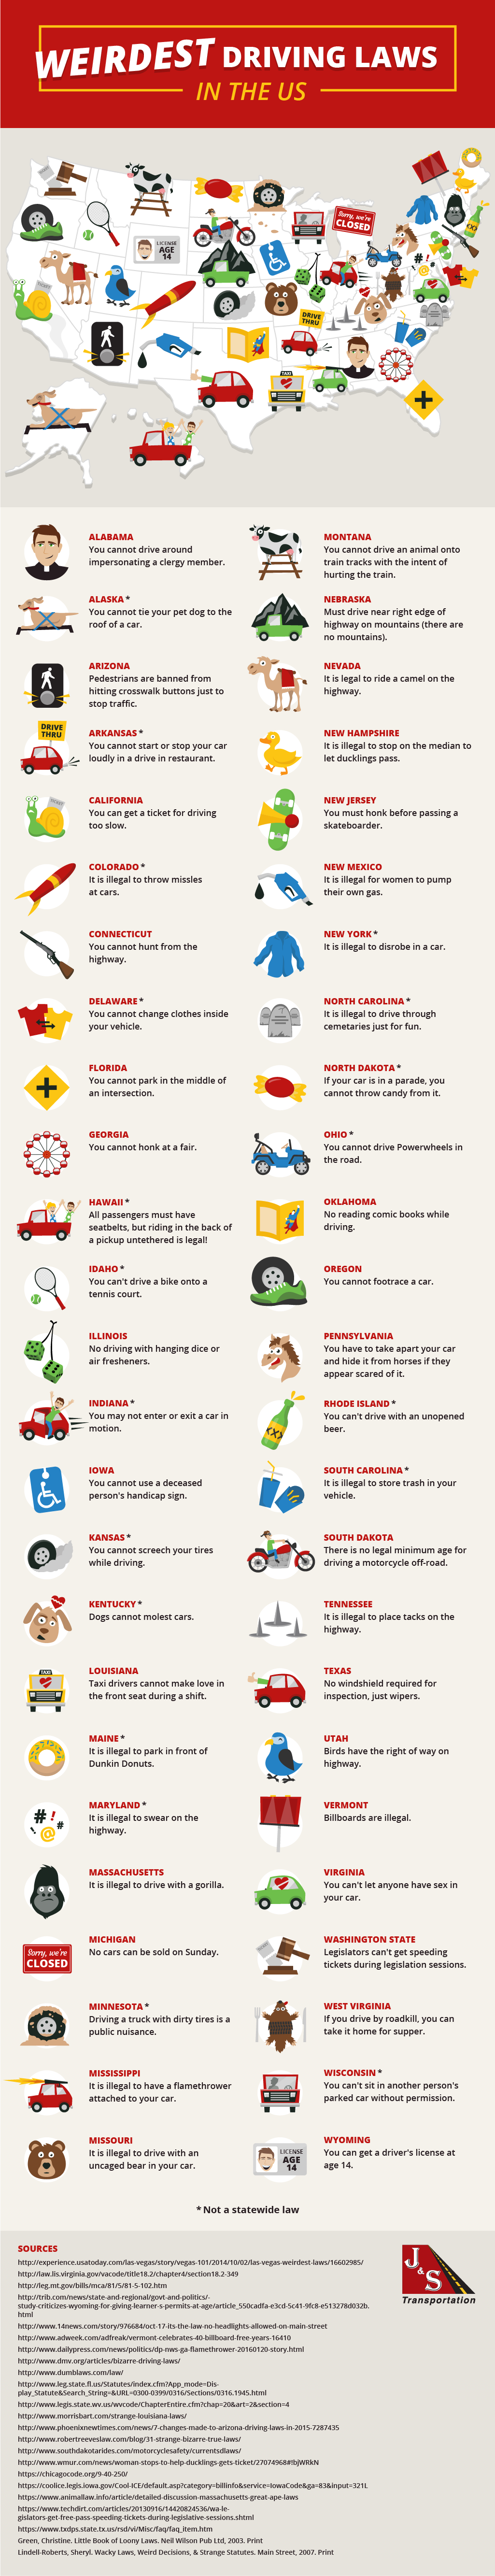 The Weirdest Driving Laws in the US Infographic